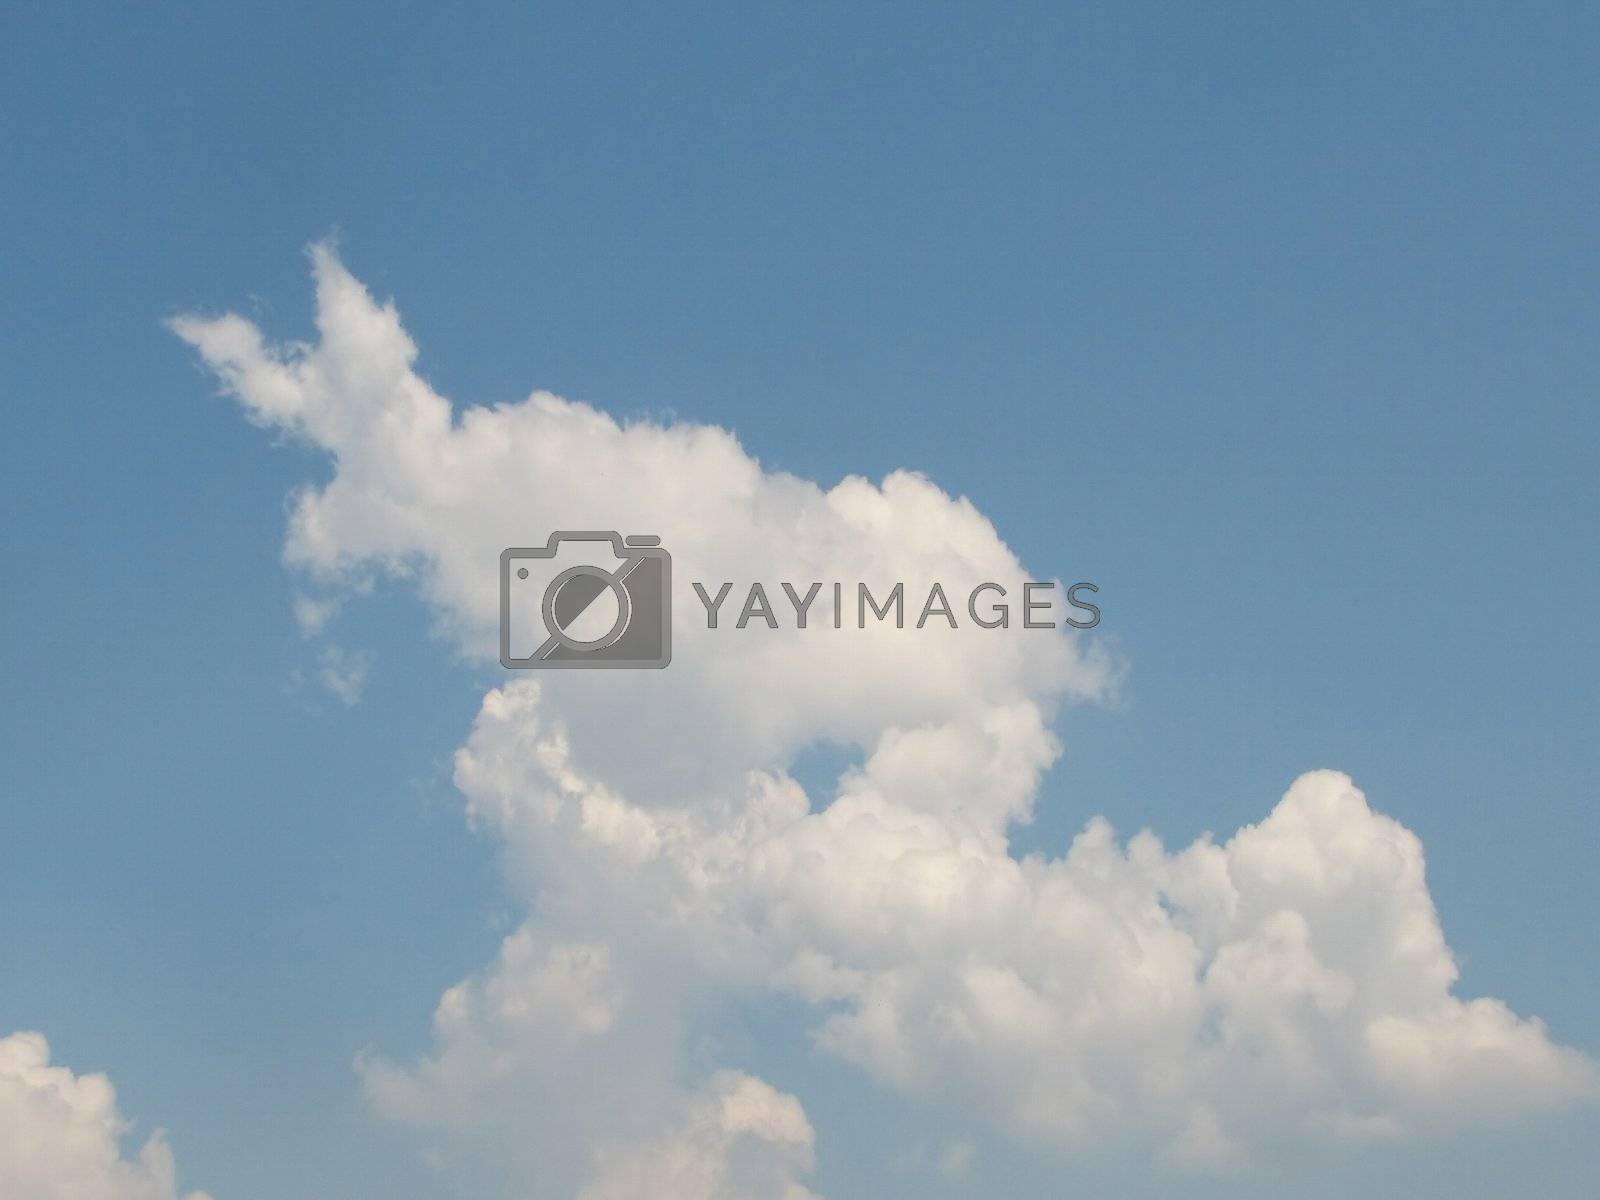 Royalty free image of Sky with clouds, usable as background by brigg